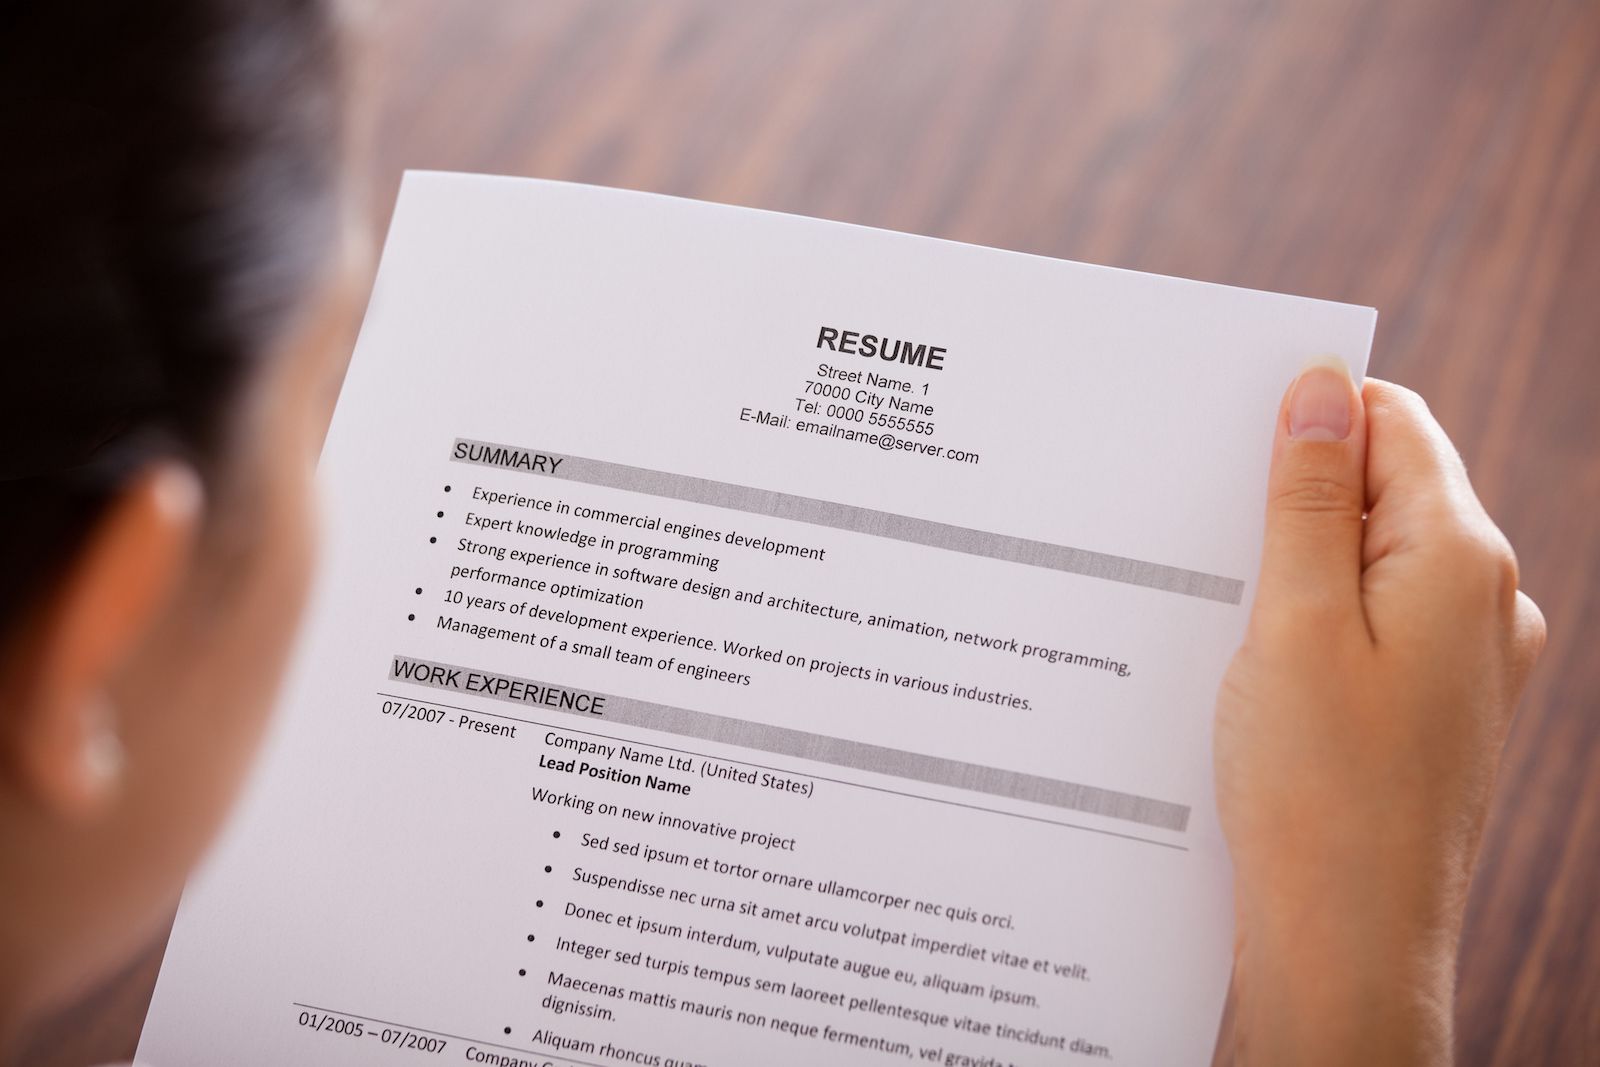 7 Changes You Should Make to Your Resume Before Applying ...